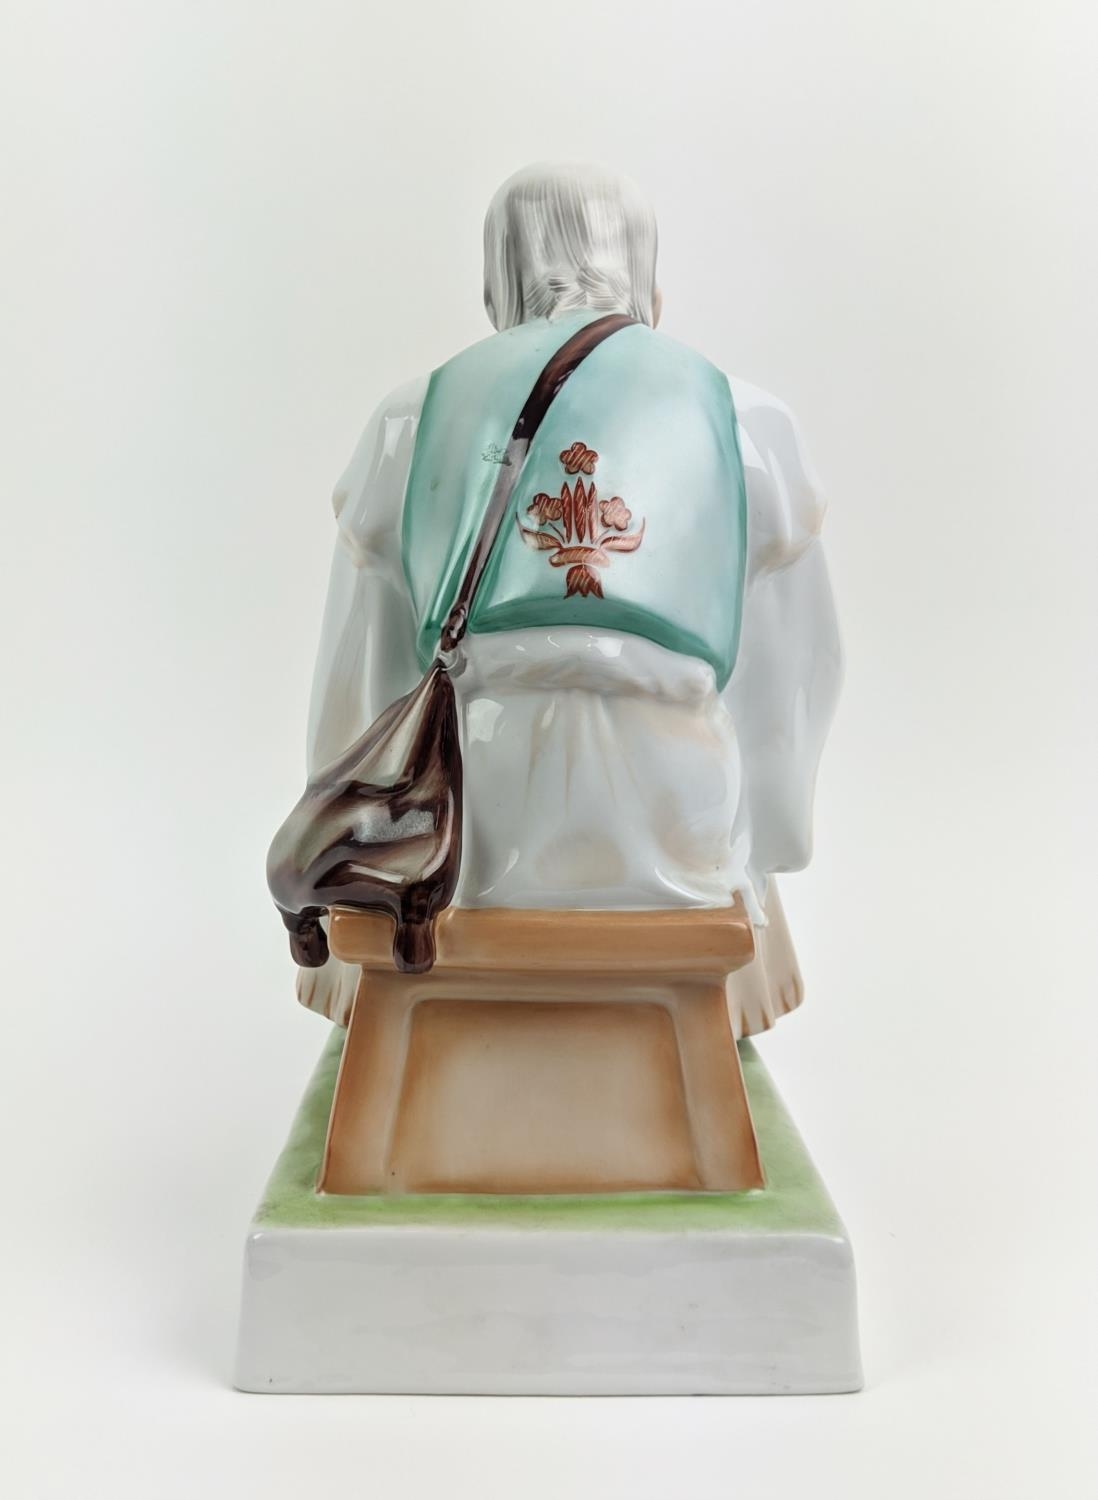 A ZSOLNAY FIGURE OF A MAN WITH A KNIFE, seated, made in Hungary, hand painted, 33cm high - Image 5 of 9